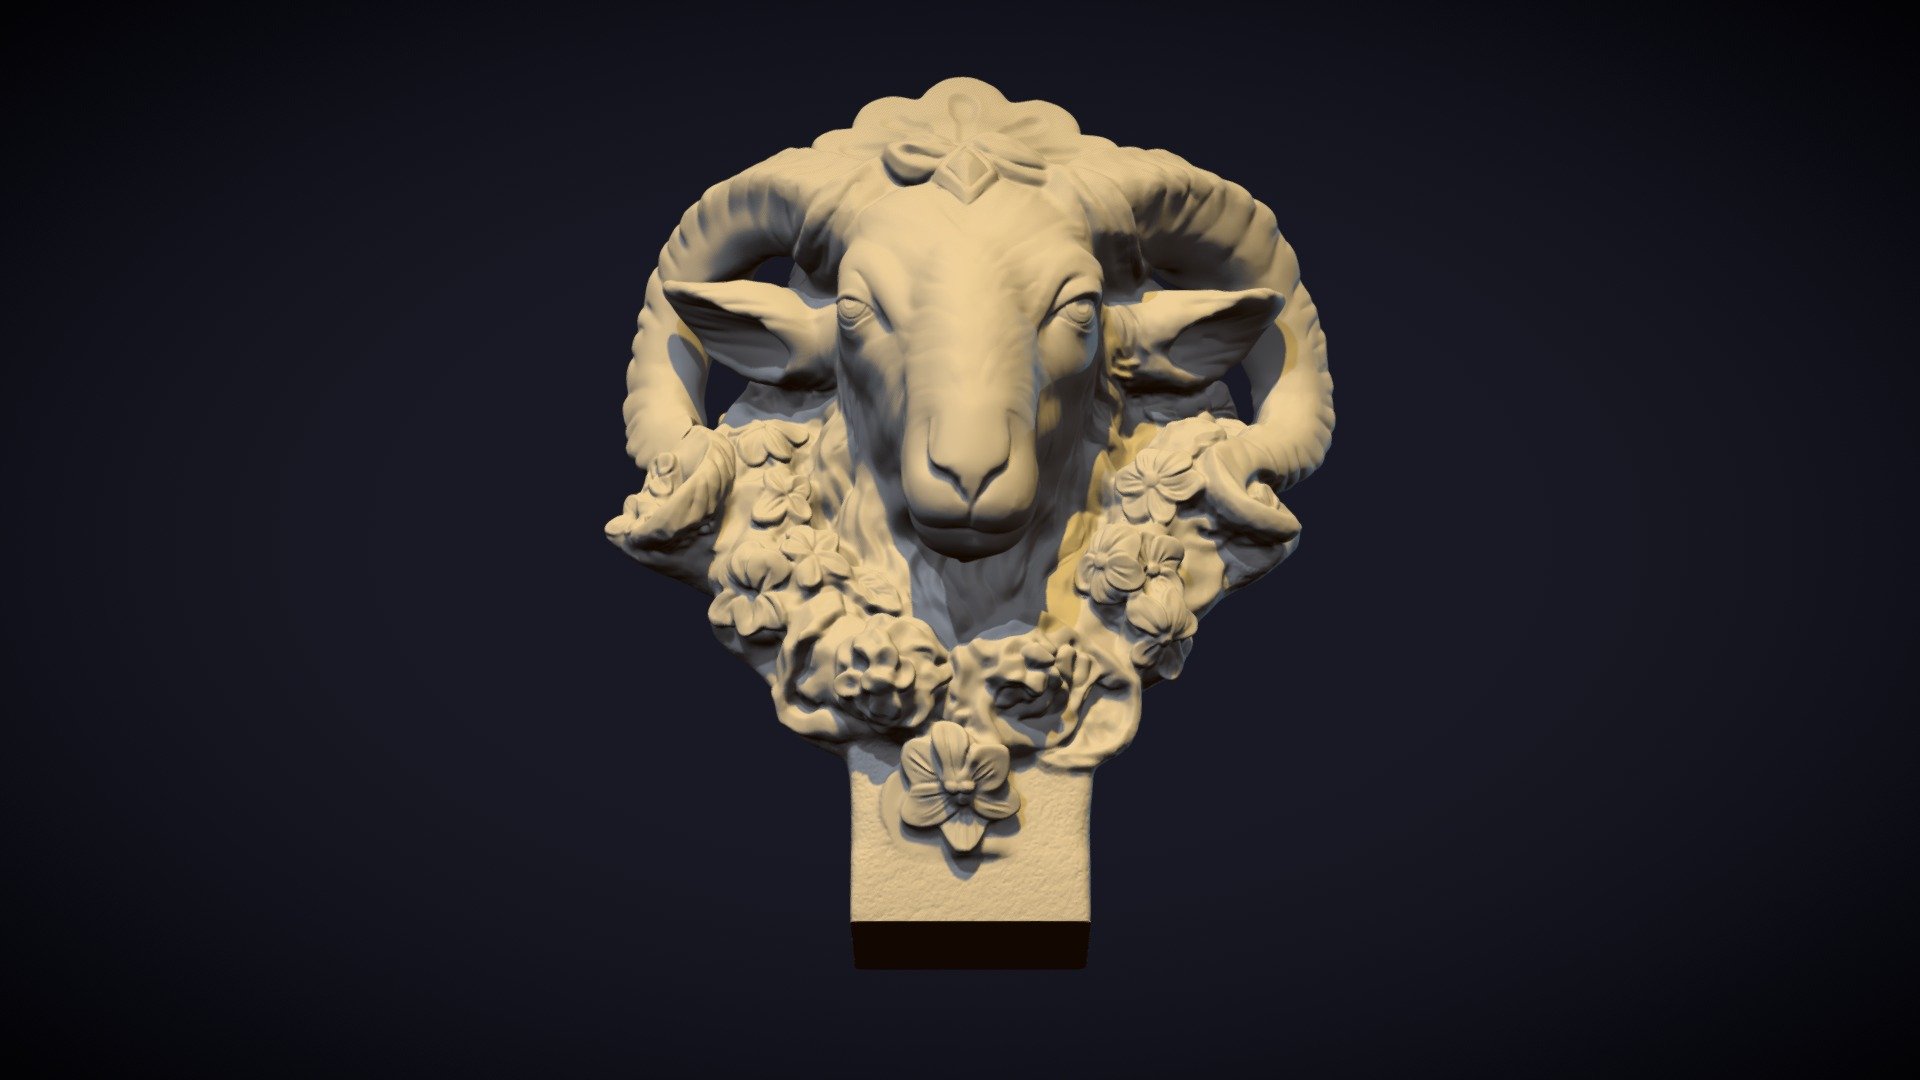 This head of a ram is a decorative section of a much larger (approx. two metres tall) vase on display at The Louvre, Paris. The vase was part of a pair, which is now missing, was commissioned by the general director of the buildings of King Philibert Orry in 1742 to decorate the park of the Chateau of Choisy (which were actually never placed there). Two other vases were created with attributes to Autumn which can be found at The Metropolitan Museum of Art in New York executed by French sculptors Jean-Baptiste Pigalle and Nicolas-Sébastien Adam. The four vessels were to be carved from drawings of the first king's architect, Ange-Jacques Gabriel. Find out more about the Autumn vase here 3d model